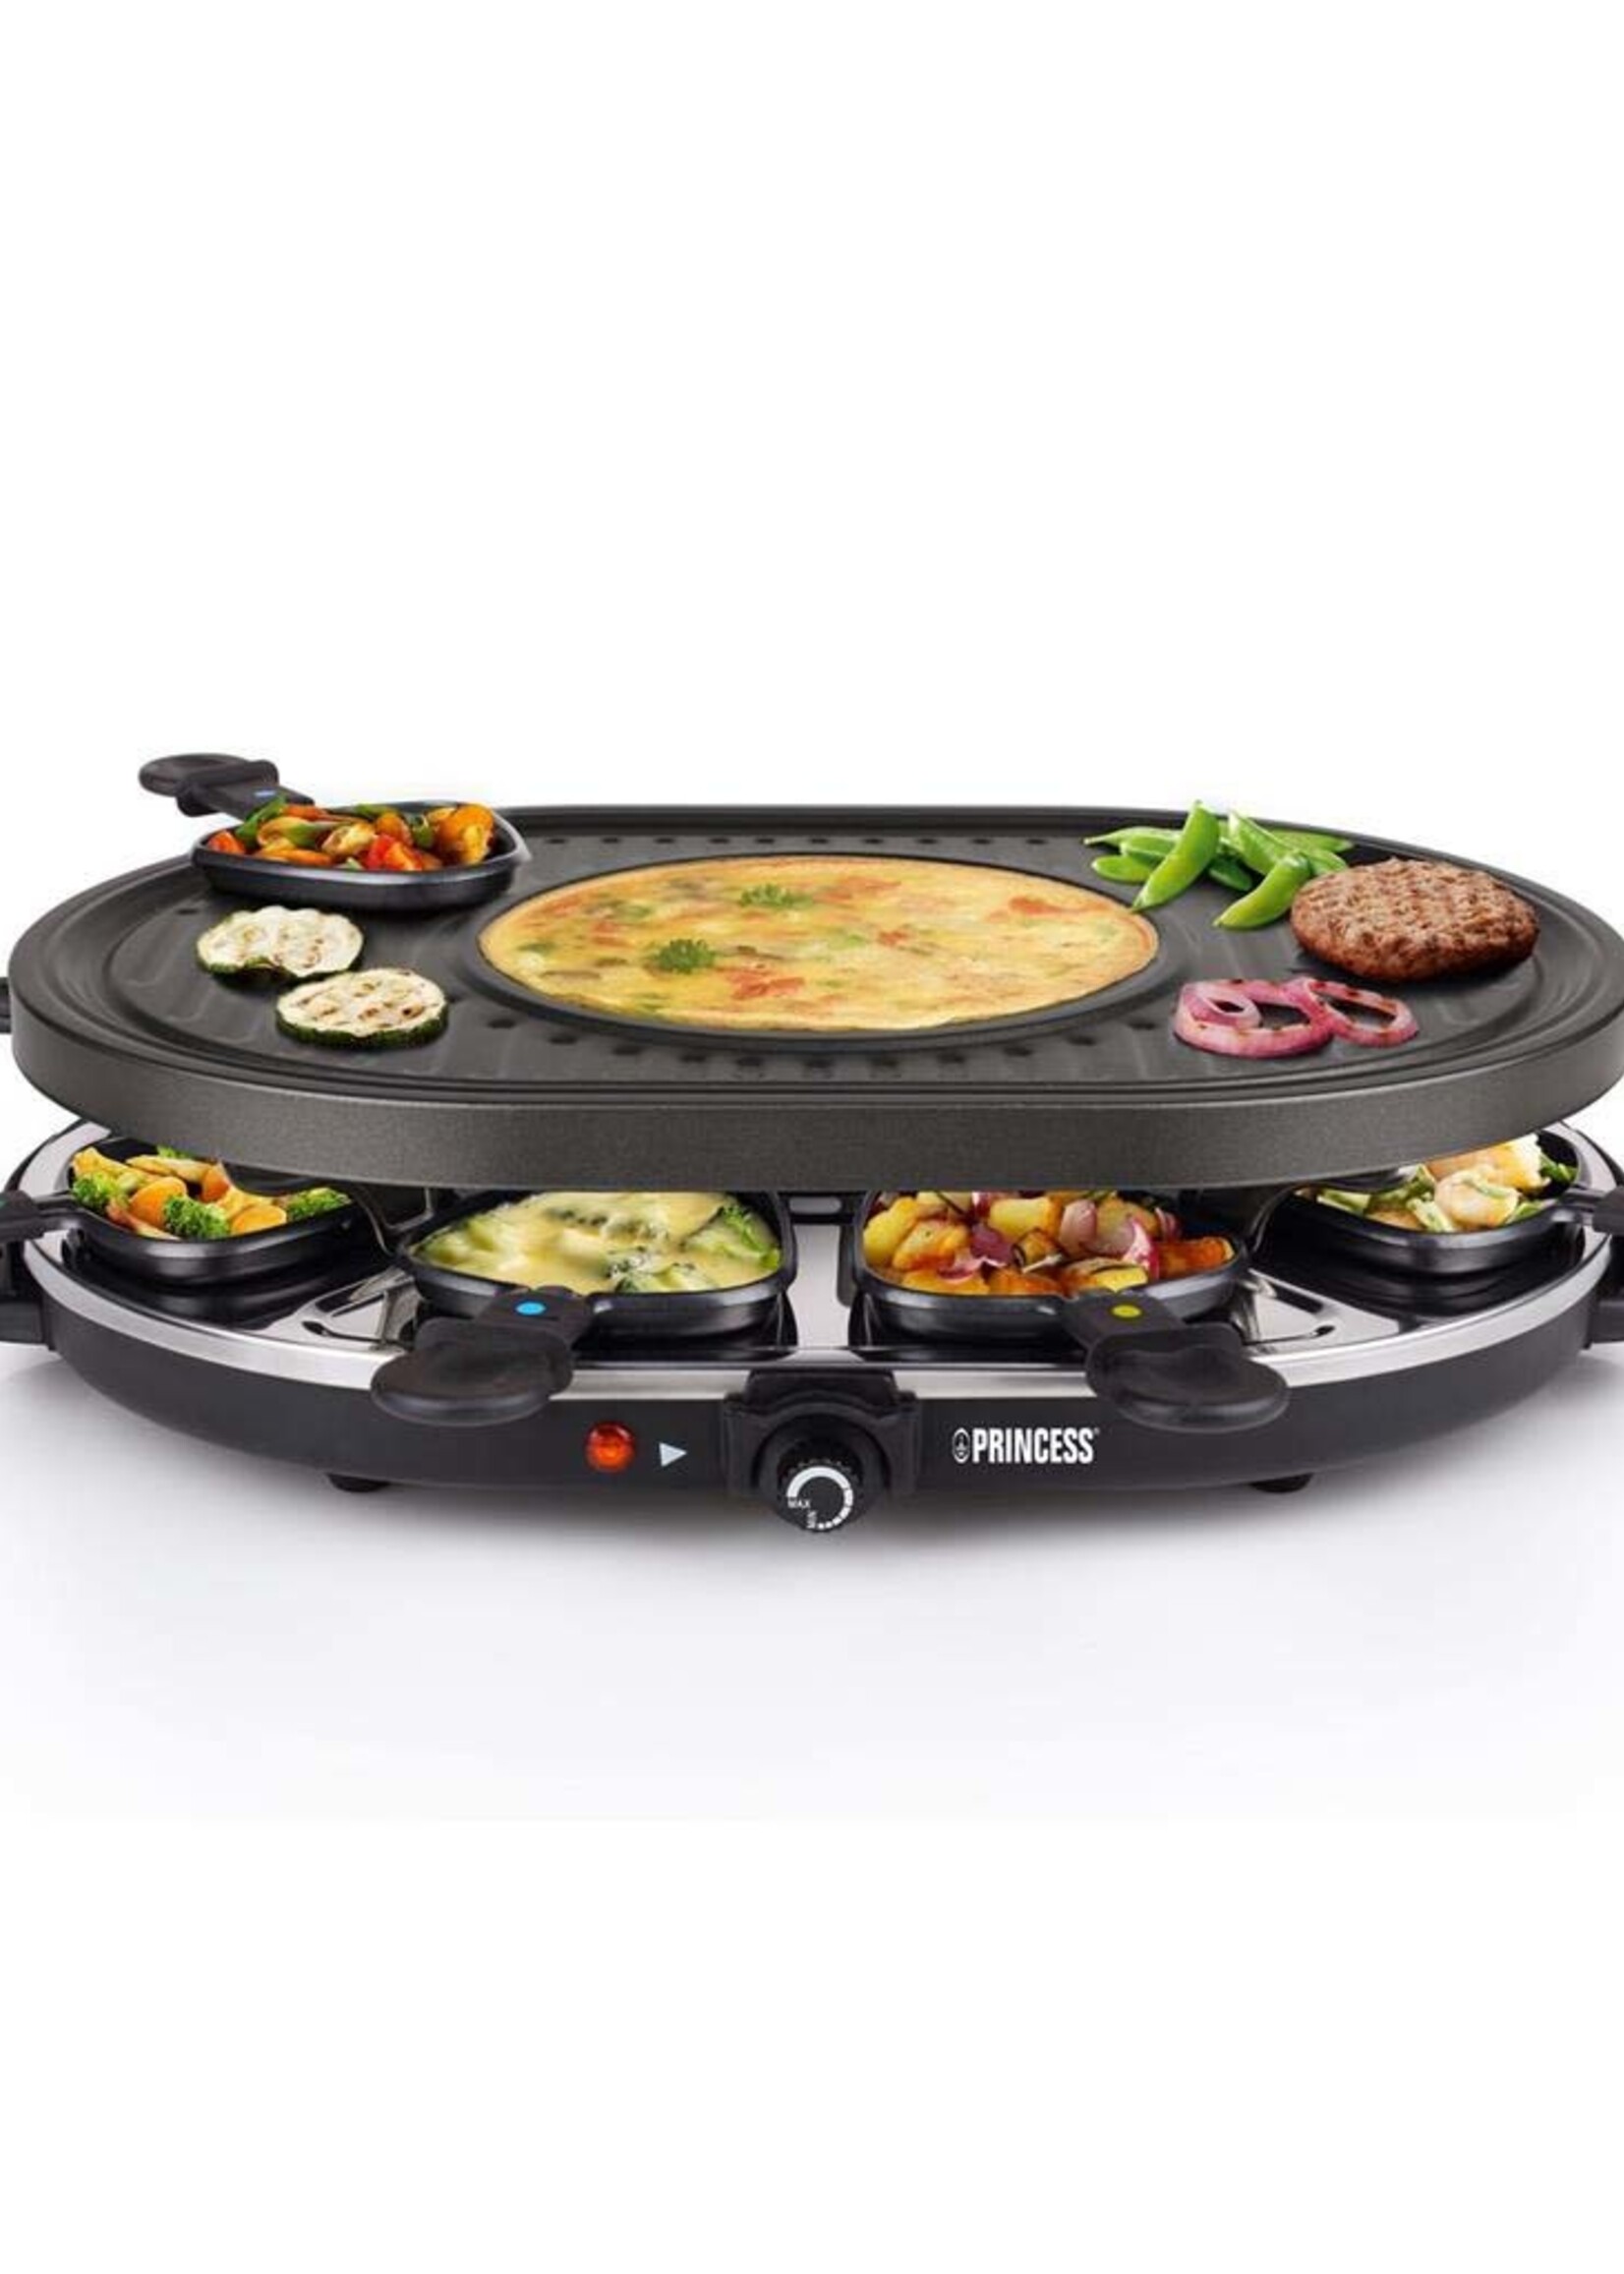 Princess Oval Grill Party 162700 - Gourmetset